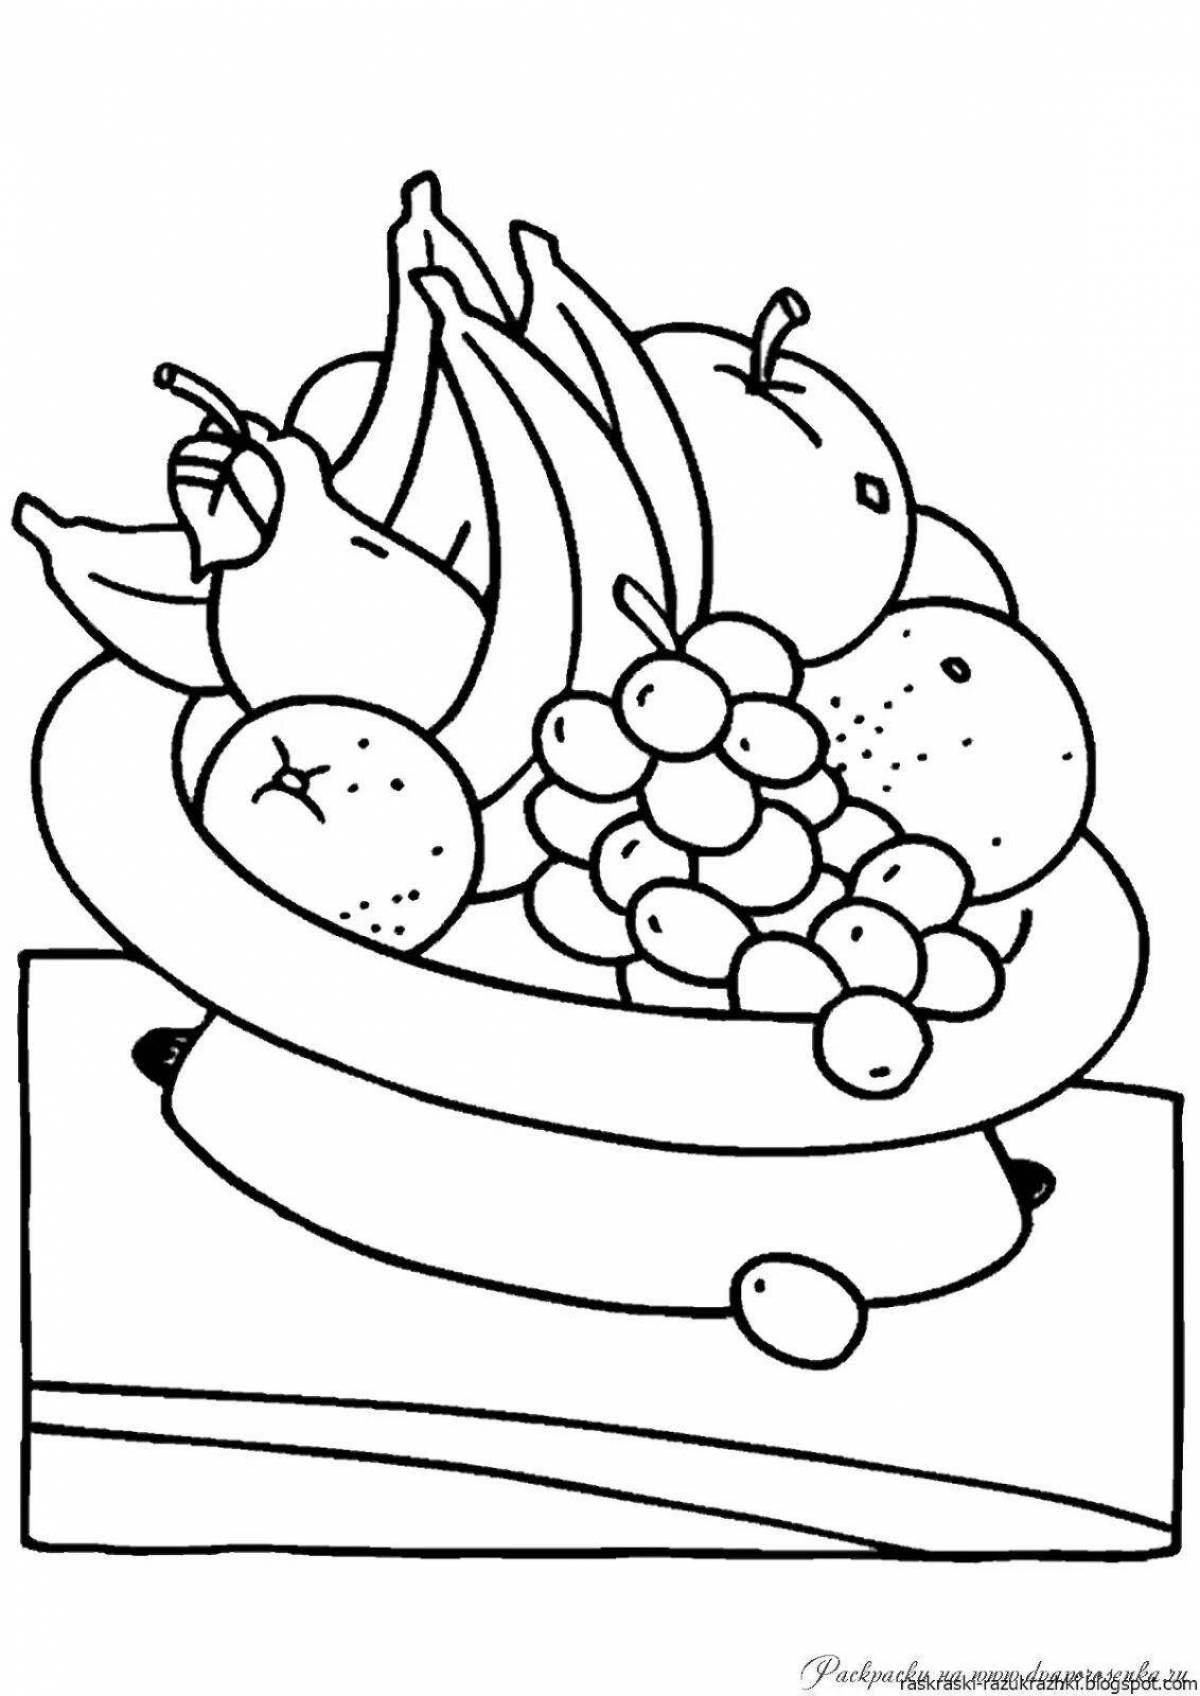 Dynamic still life coloring page